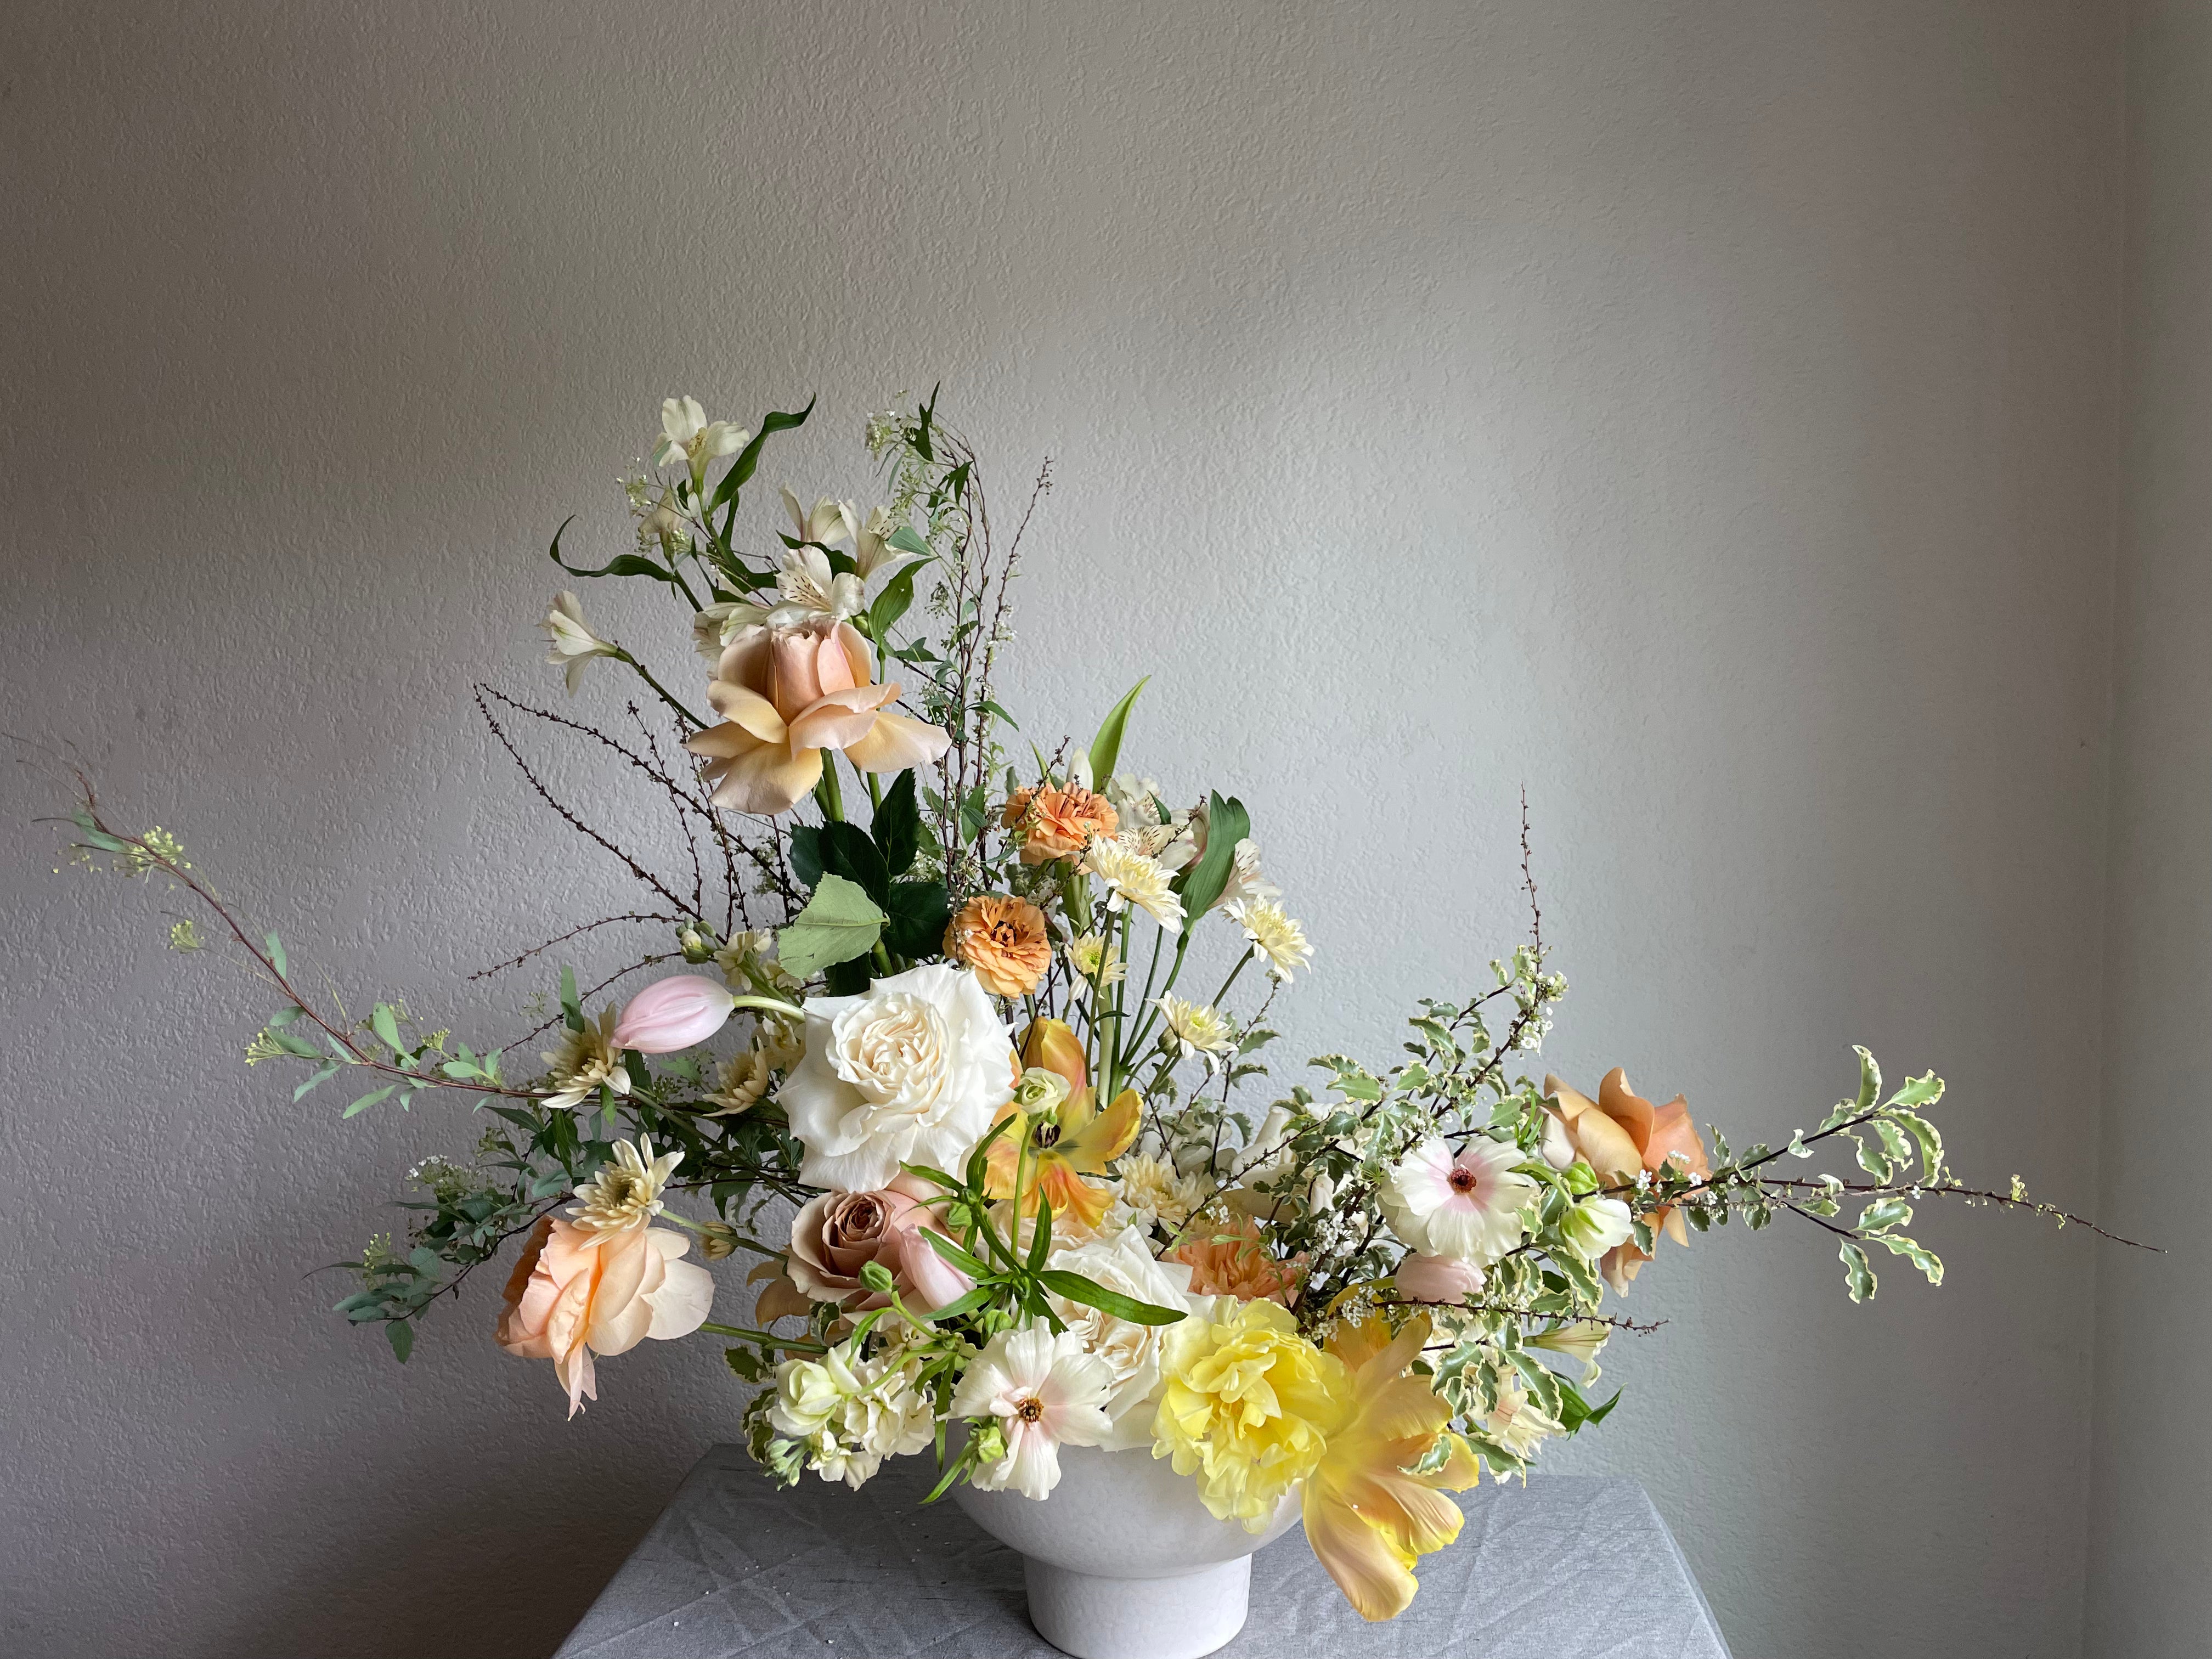 unique and natural floral centerpiece blending seasonal and locally sourced flowers